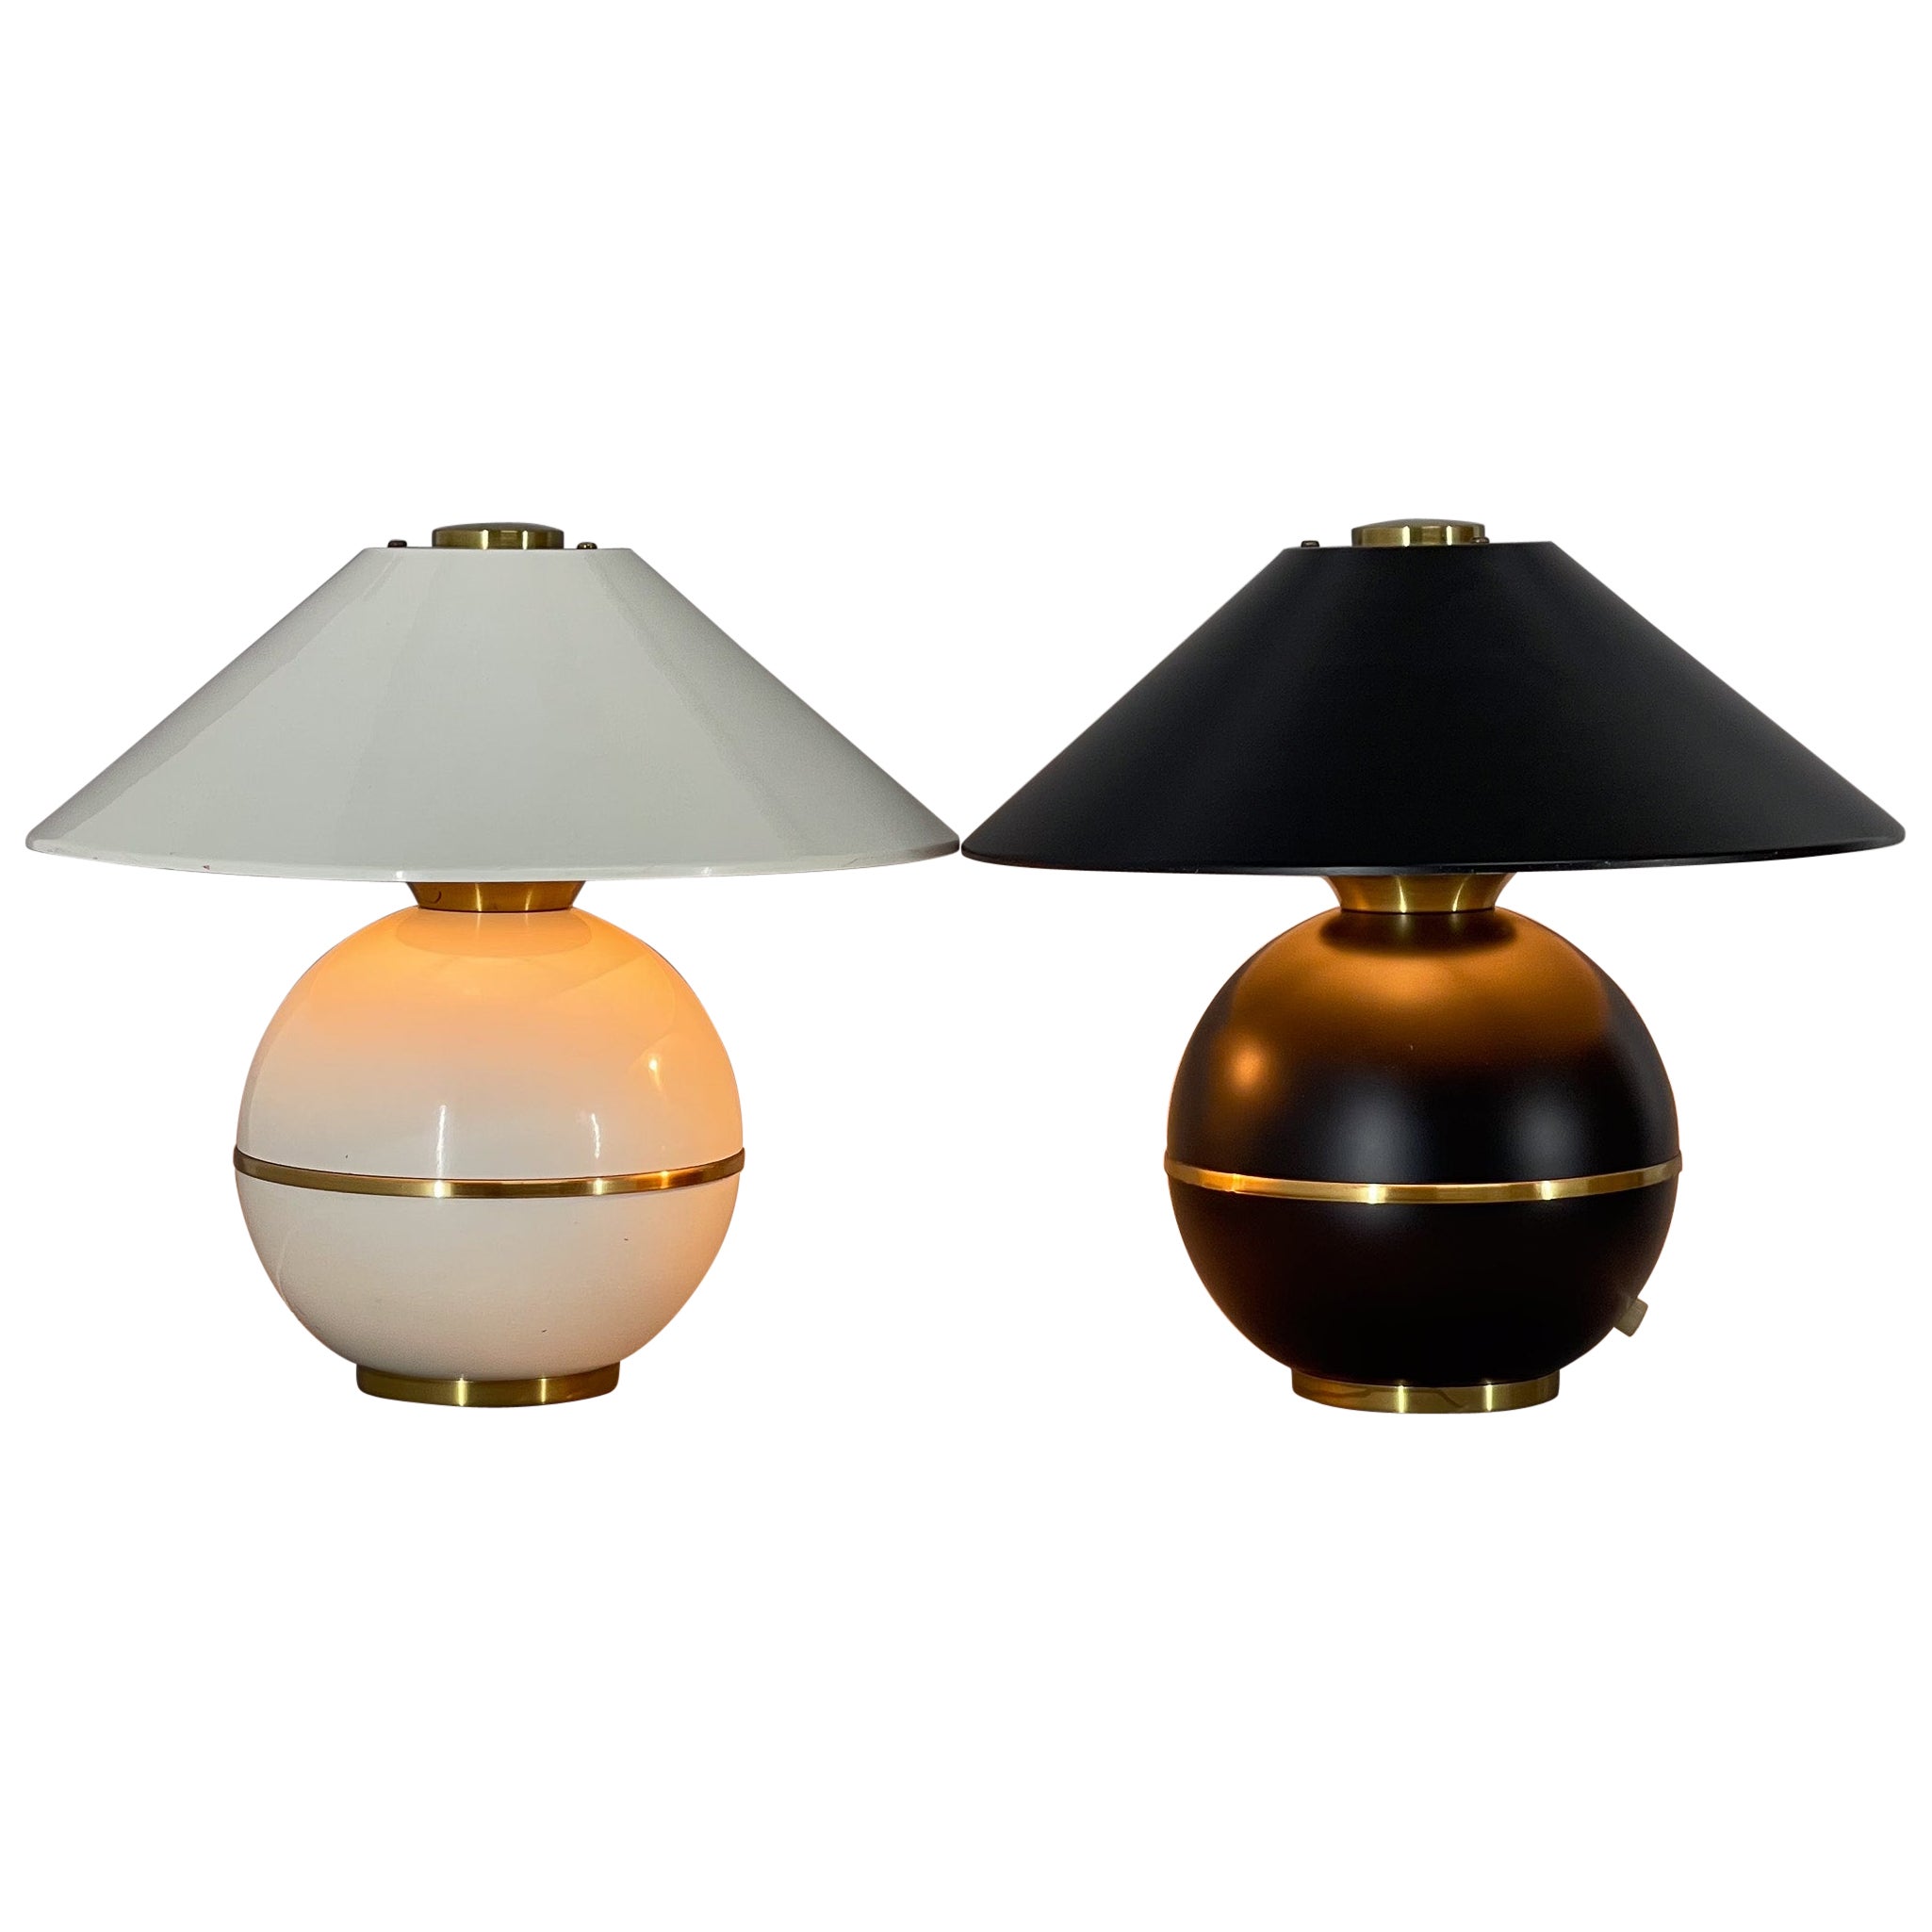 Pair of Mid-Century Brass & Metal Table Lamps by Napako, Czechoslovakia